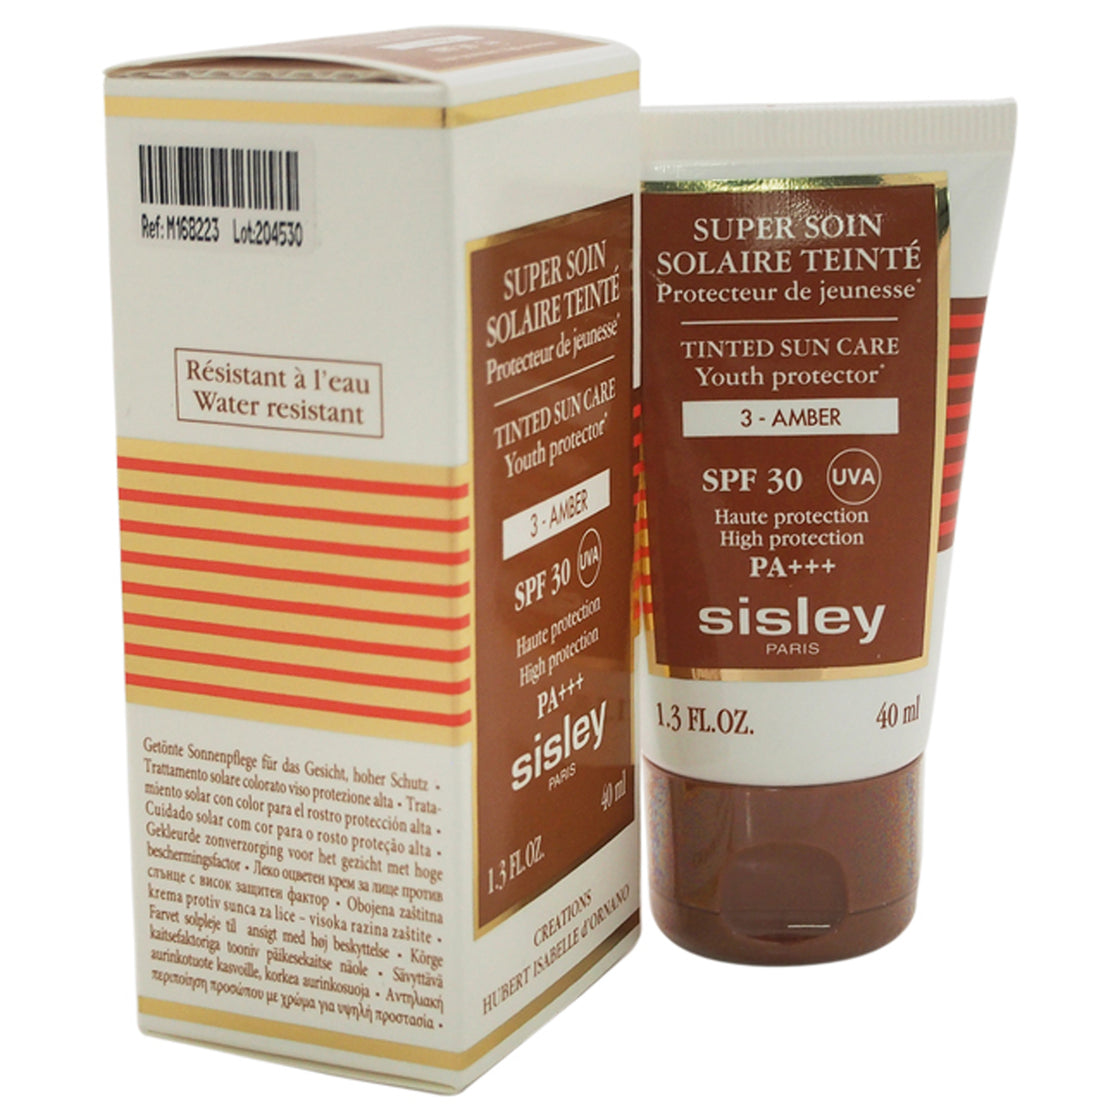 Super Soin Solaire Tinted Sun Care SPF 30 - 3 Amber by Sisley for Women - 1.3 oz Sun Care